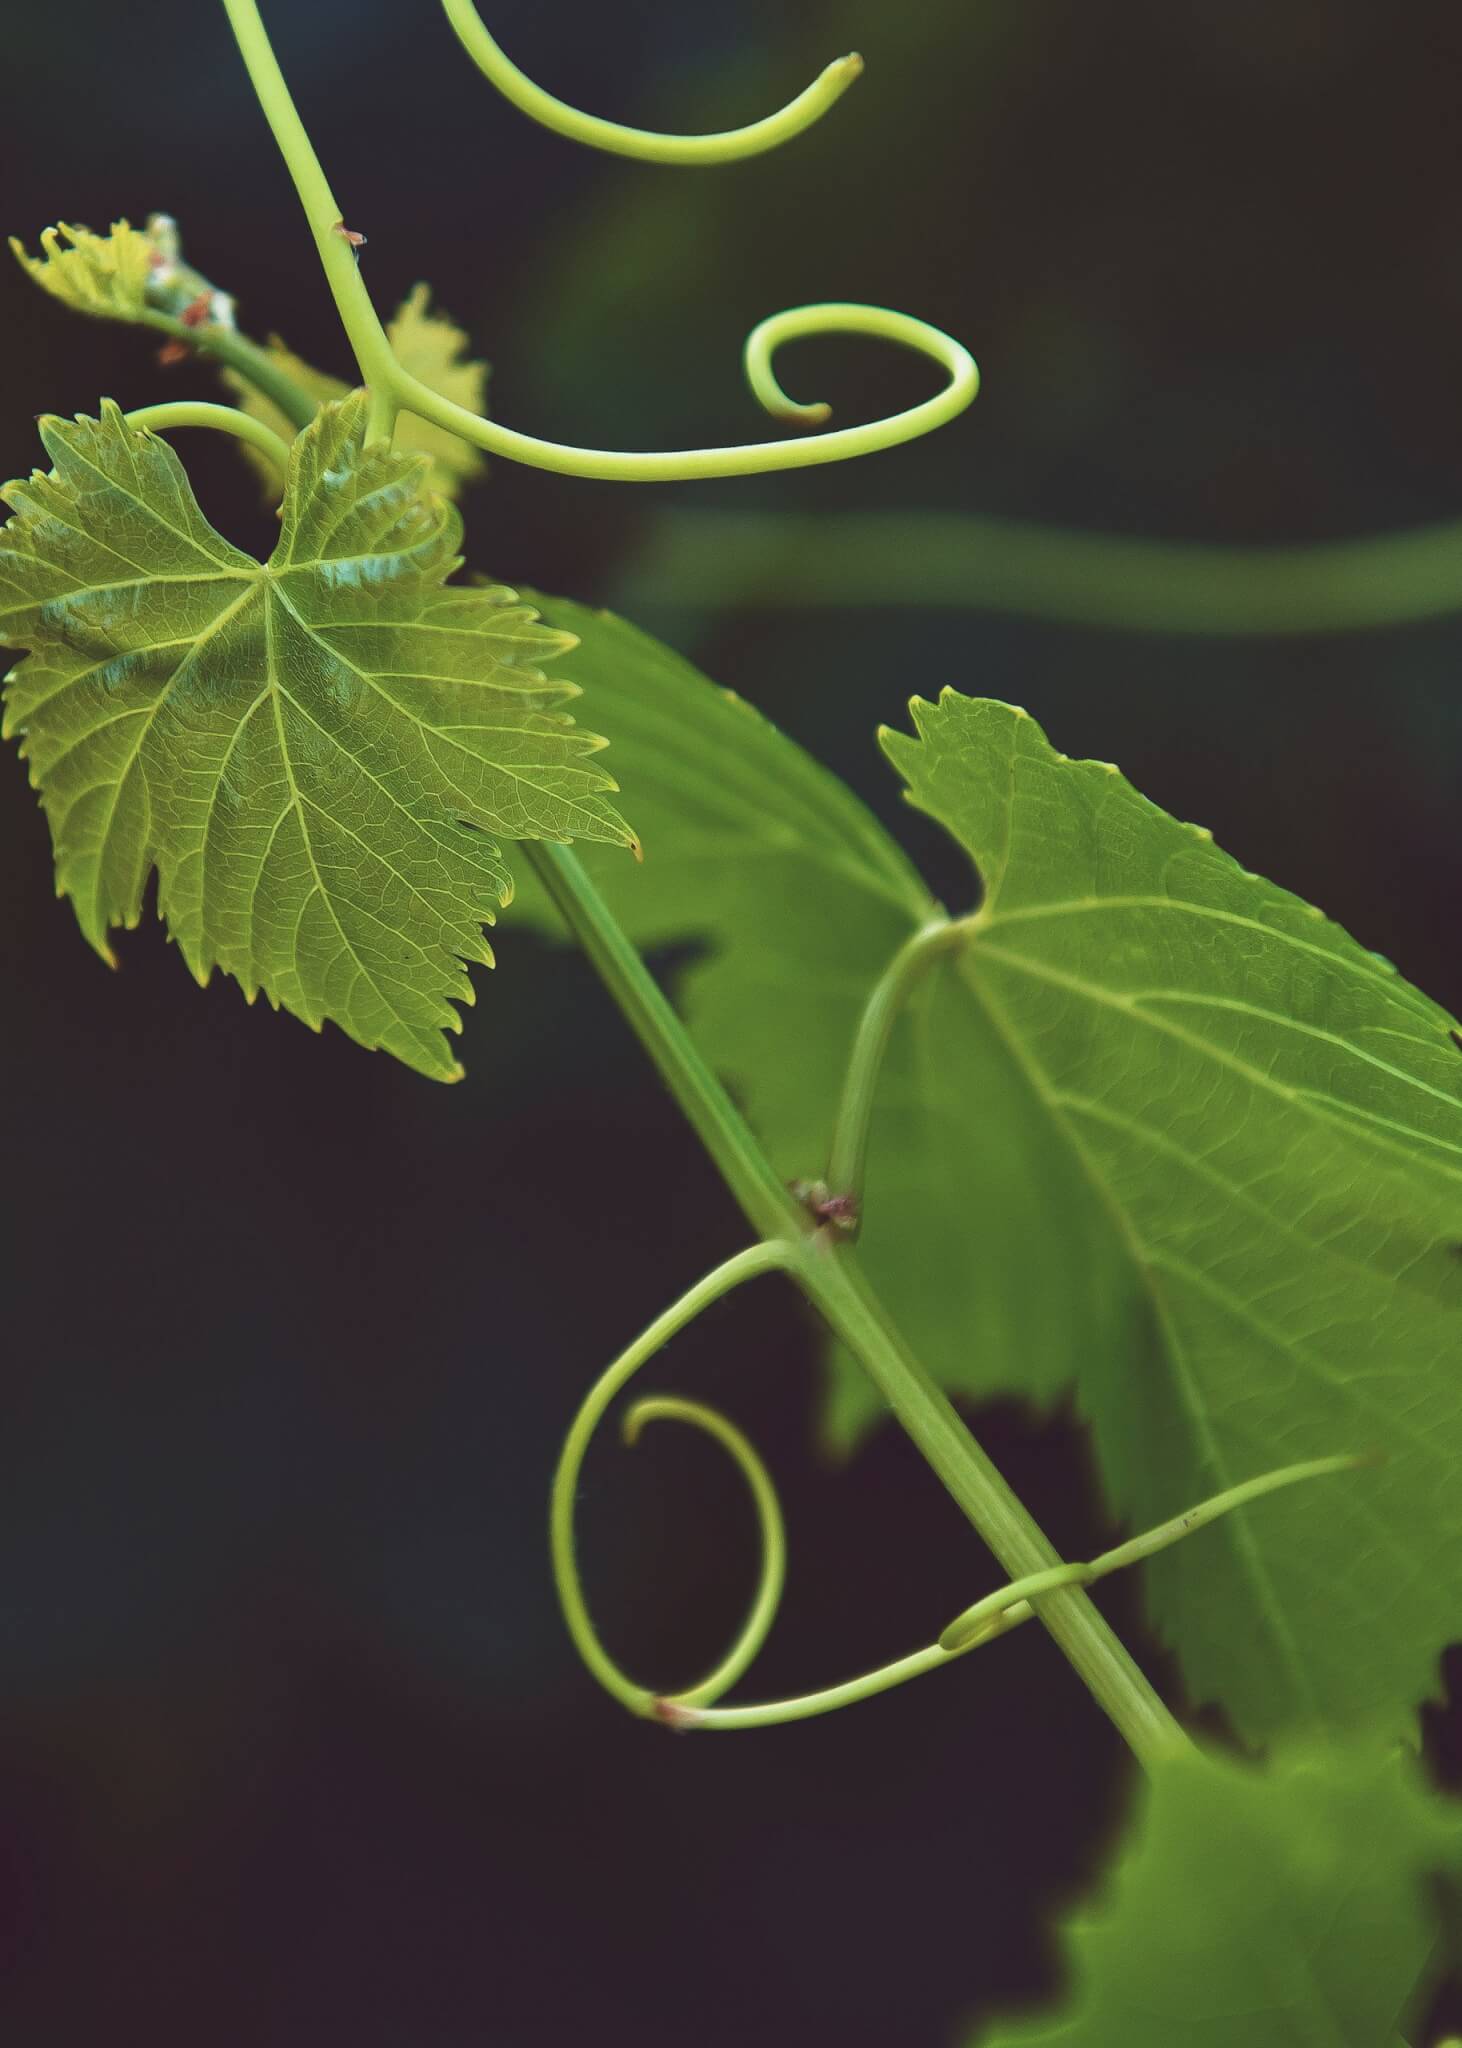 Vines and leaves